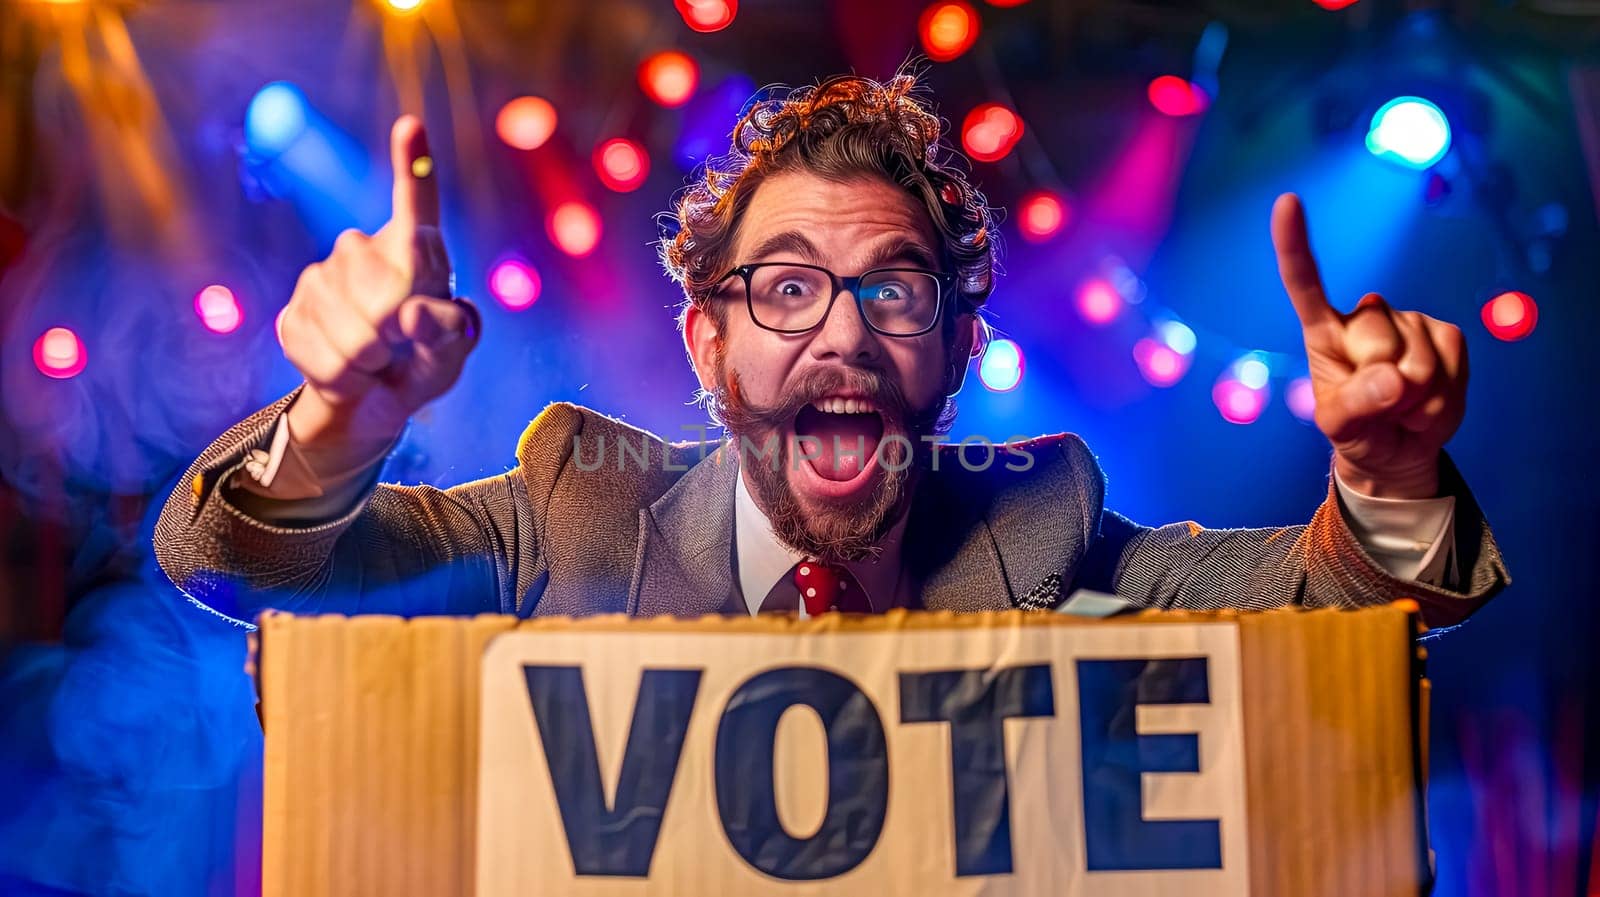 Enthusiastic voter at a rally by Edophoto